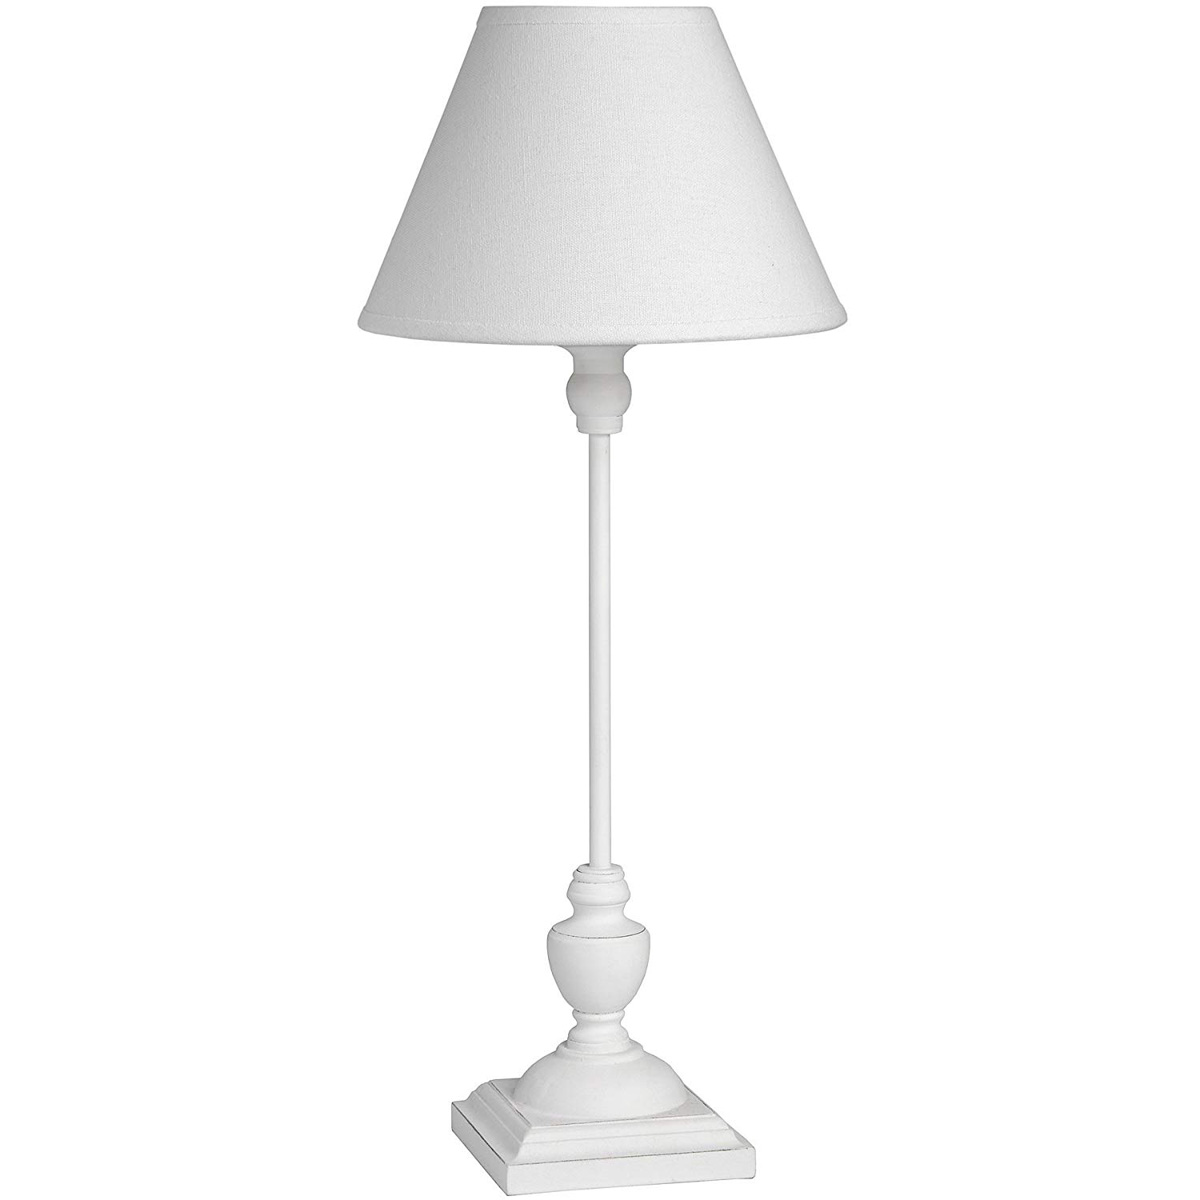 Slim Antique White Wooden Table Lamp, Antique White Table Lamp